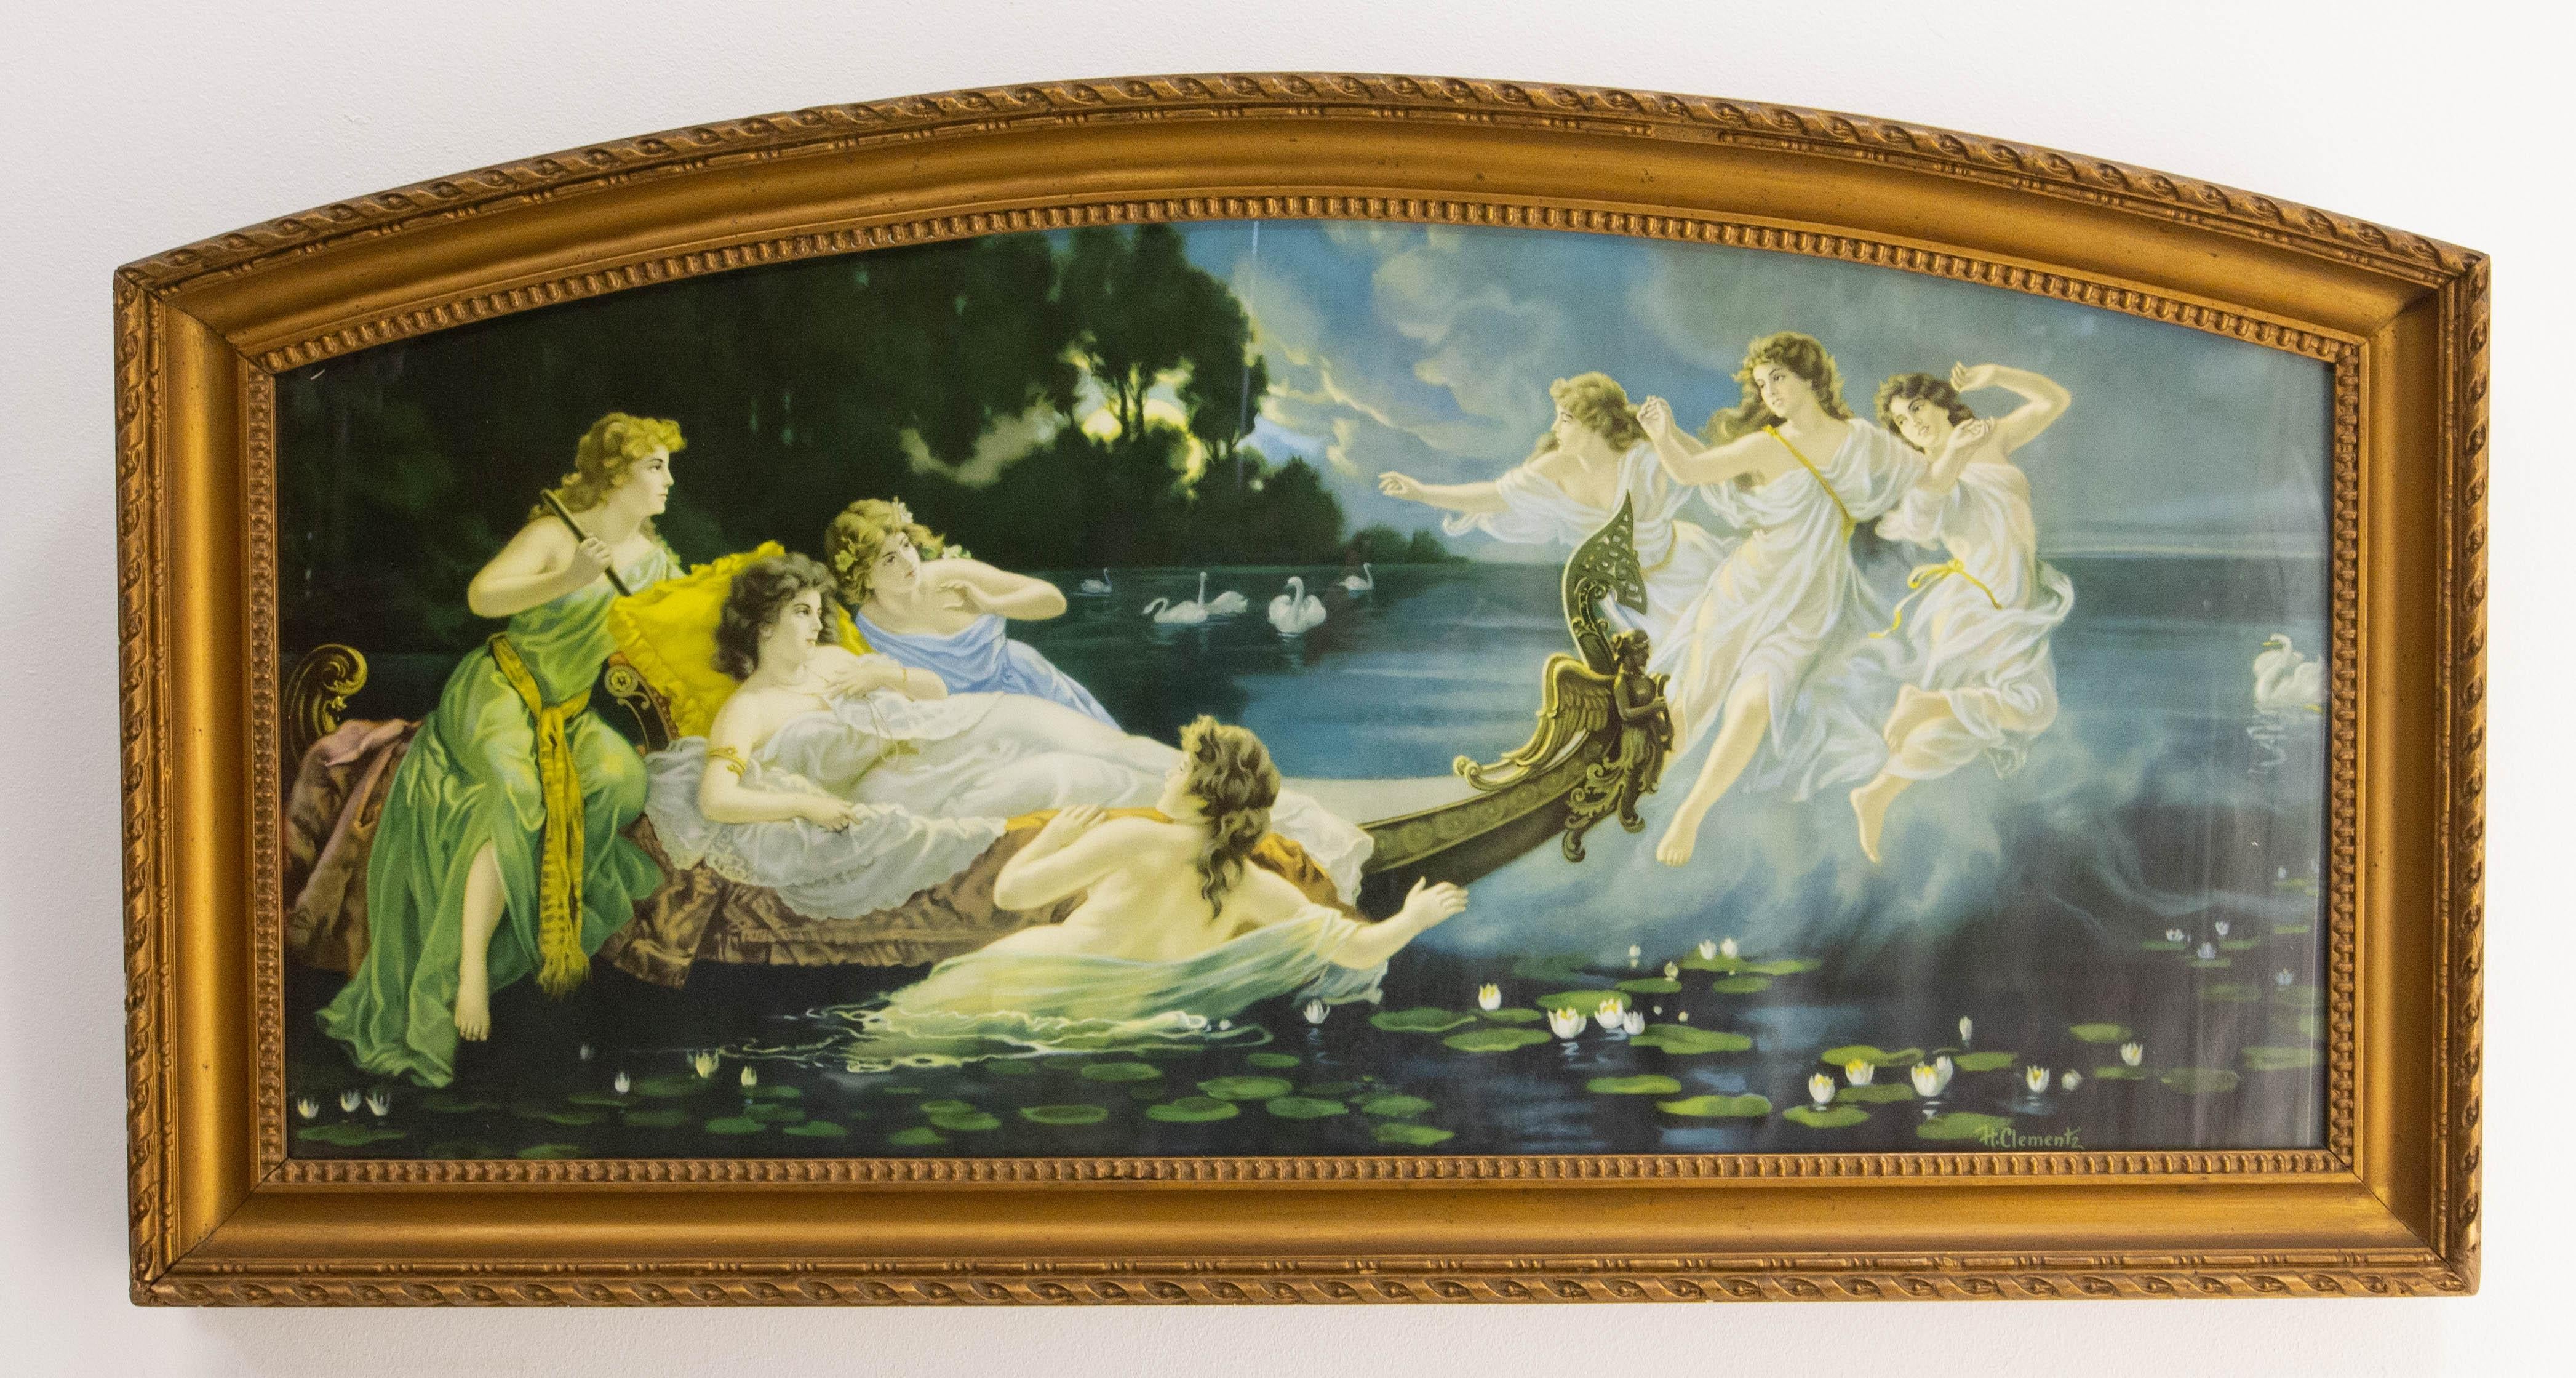 Boat of Nymphs by Hermann Clementz.
Clementz was a German genre and portrait painter (1852-1930).
In 2012, the original oil painted of this lithograph 